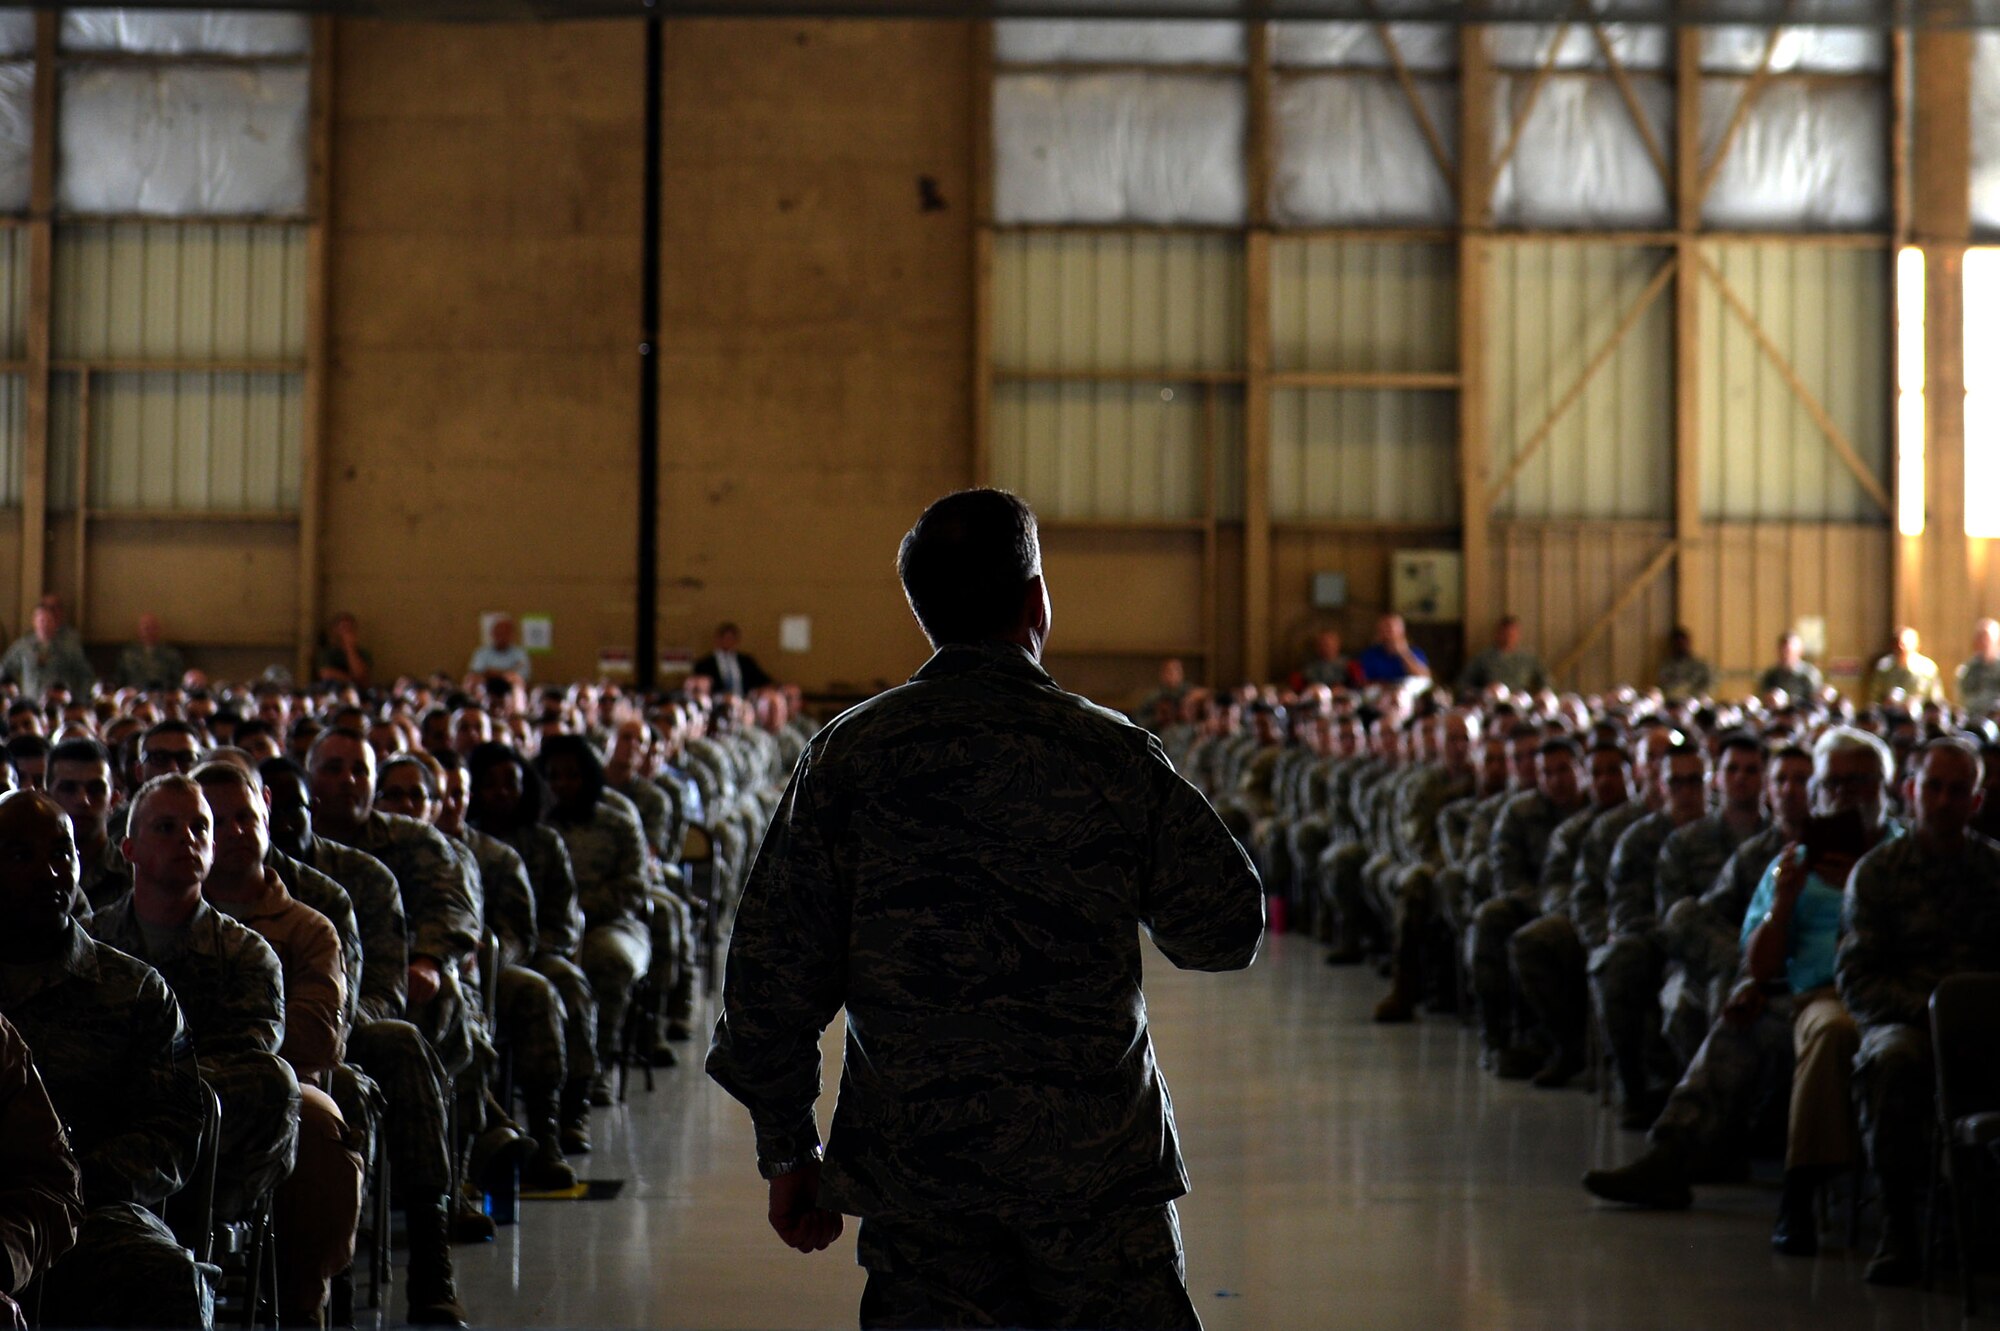 U.S. Airmen assigned to Shaw Air Force Base, S.C., listen as Air Force Chief of Staff Gen. David L. Goldfein speaks about current Air Force operations during an all-call at Shaw Air Force Base, S.C., May 30, 2017. During the all-call Airmen received the opportunity to ask Goldfein questions about the current state of the Air Force and any concerns they had. (U.S. Air Force photo by Airman 1st Class Christopher Maldonado)